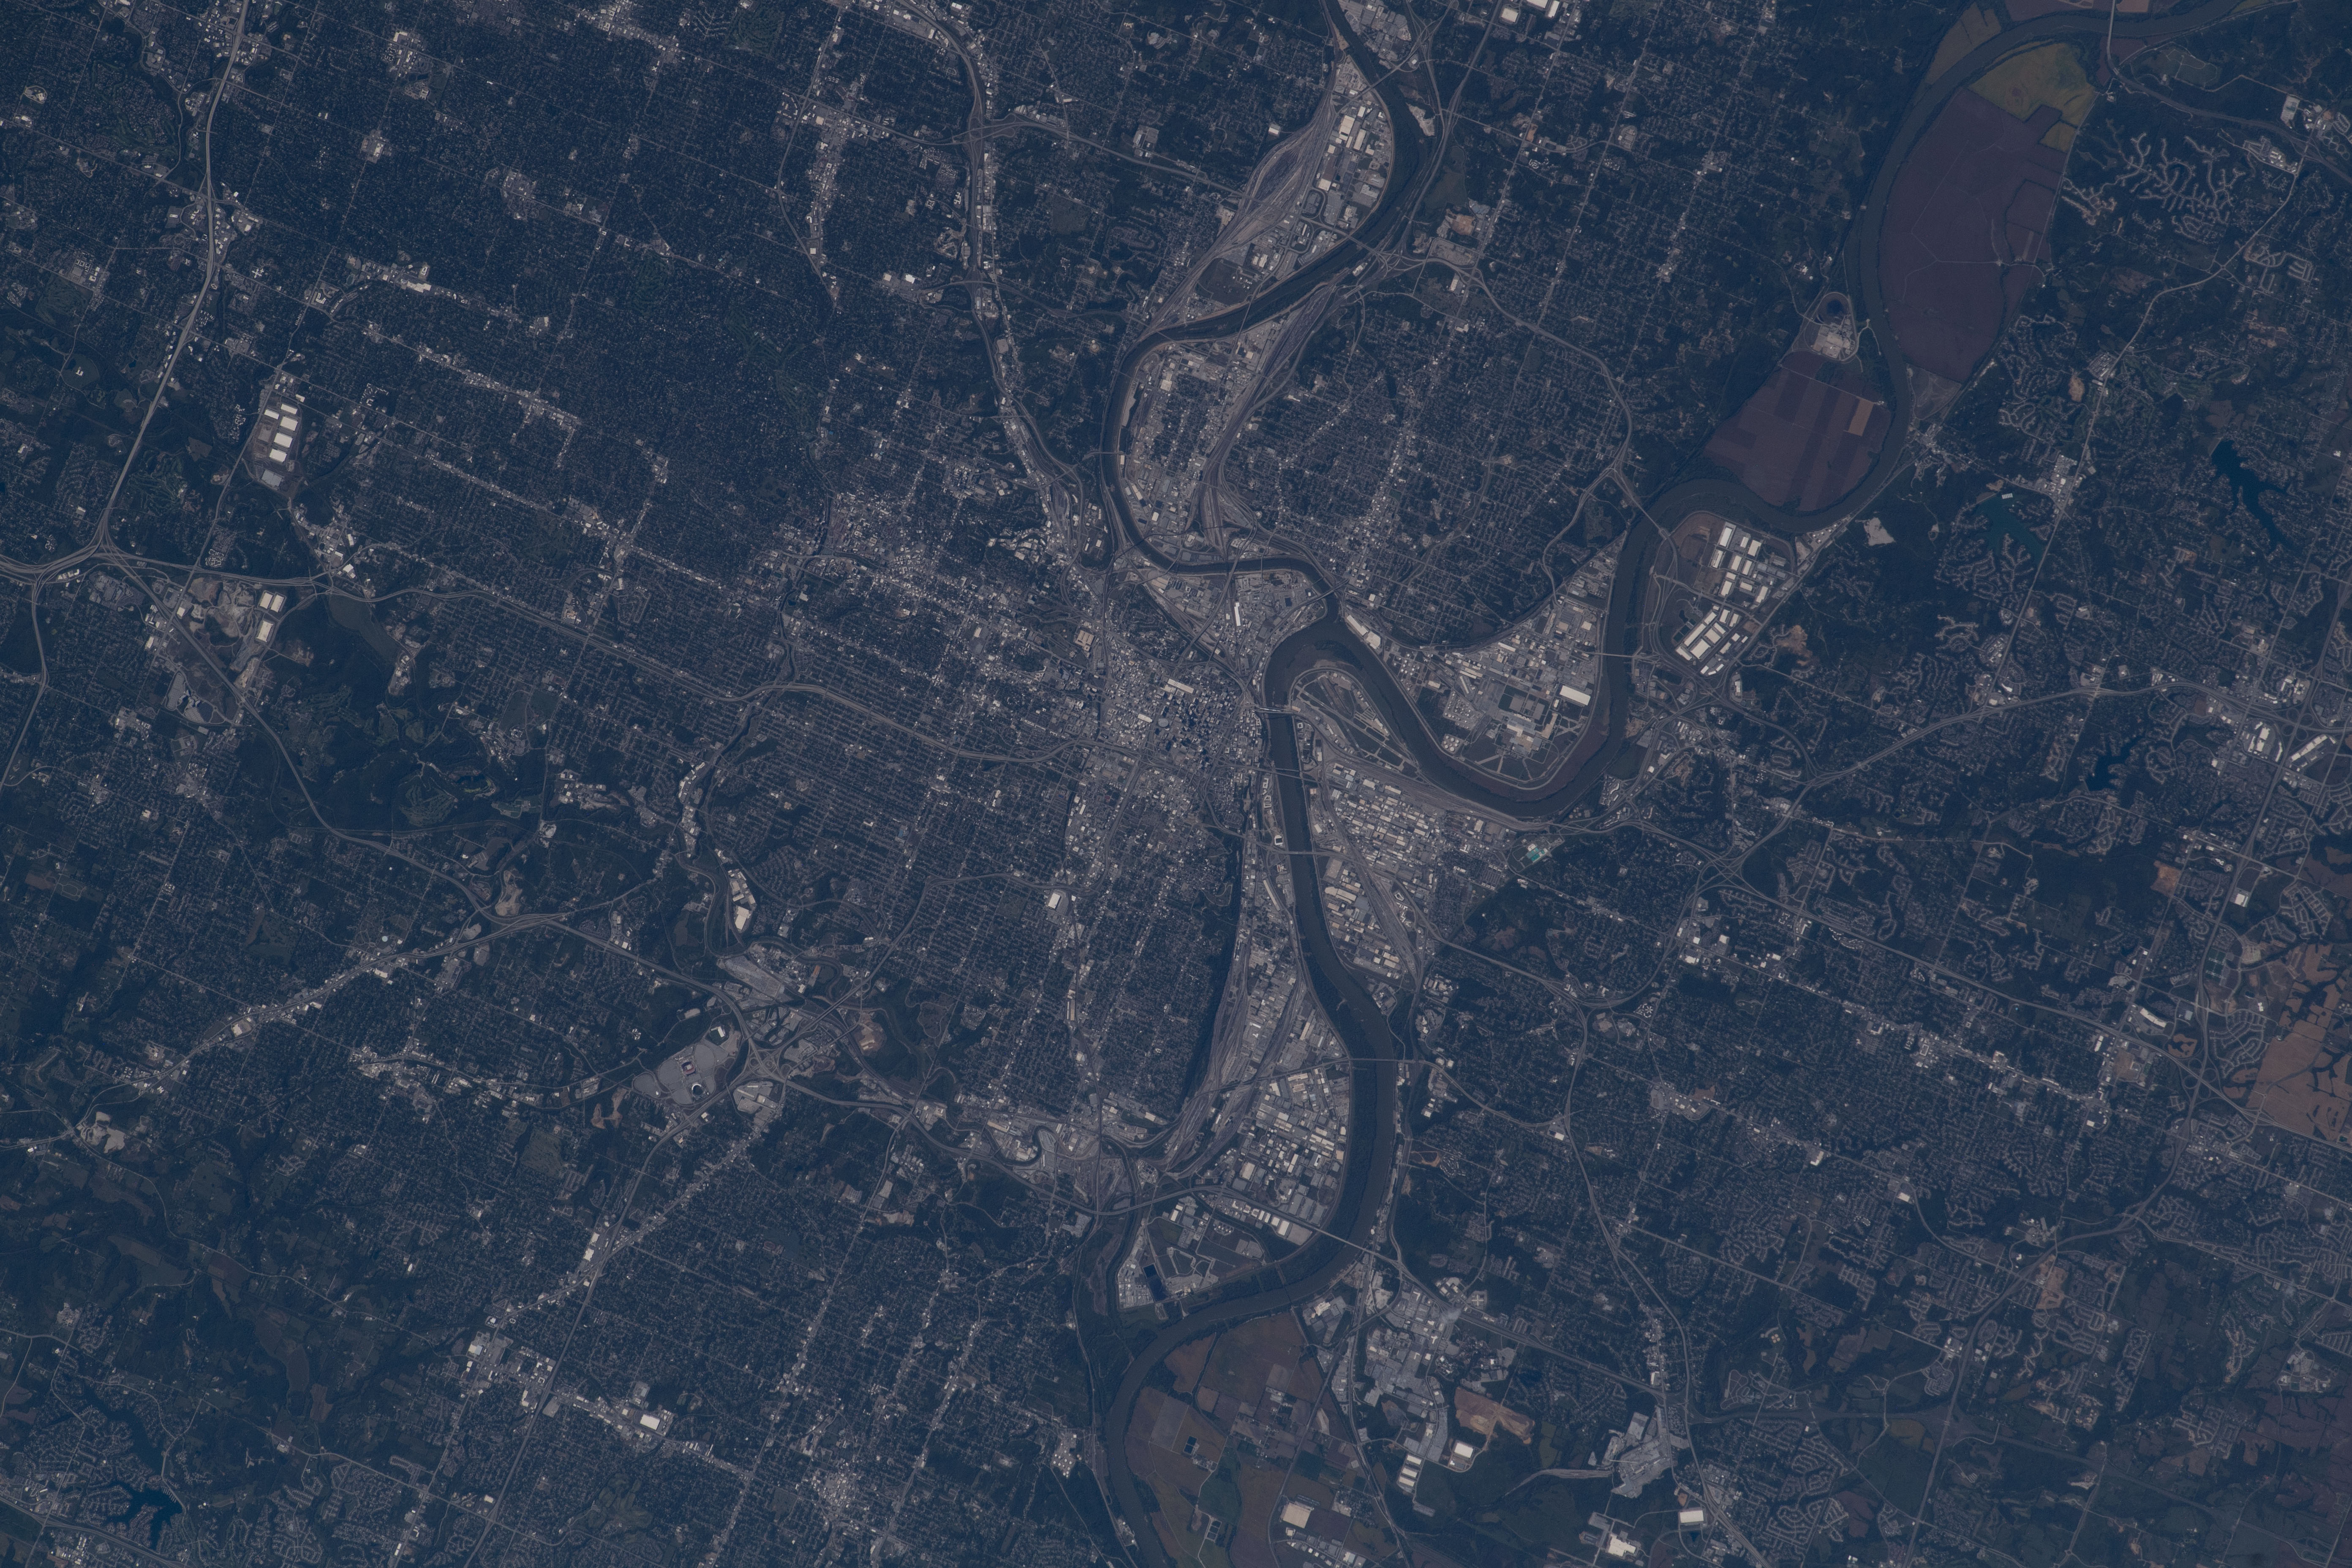 A view of Kansas City, Missouri, from space. The winding Missouri River is the focal point of the image, and Arrowhead Stadium is visible to the lower left of the river. The land is green, while the downtown city areas appear gray.